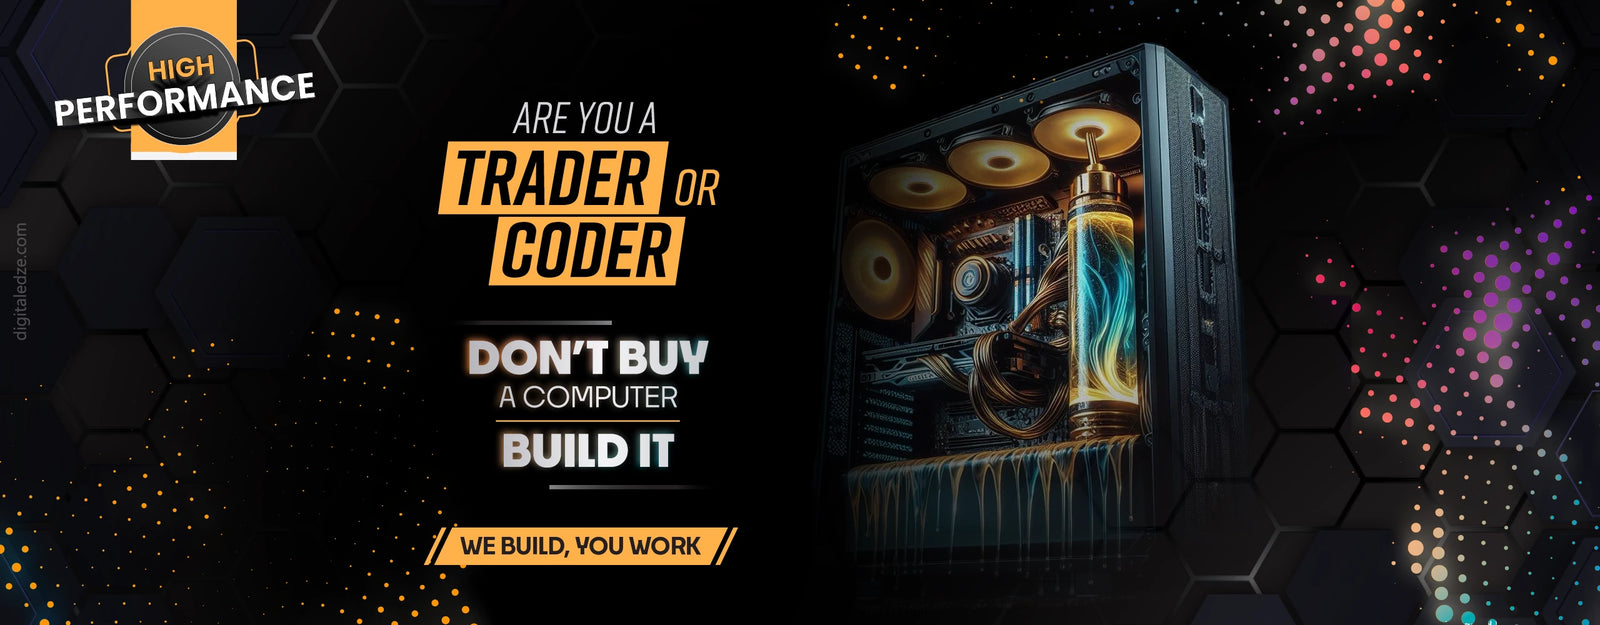 FOR TRADERS AND CODERS